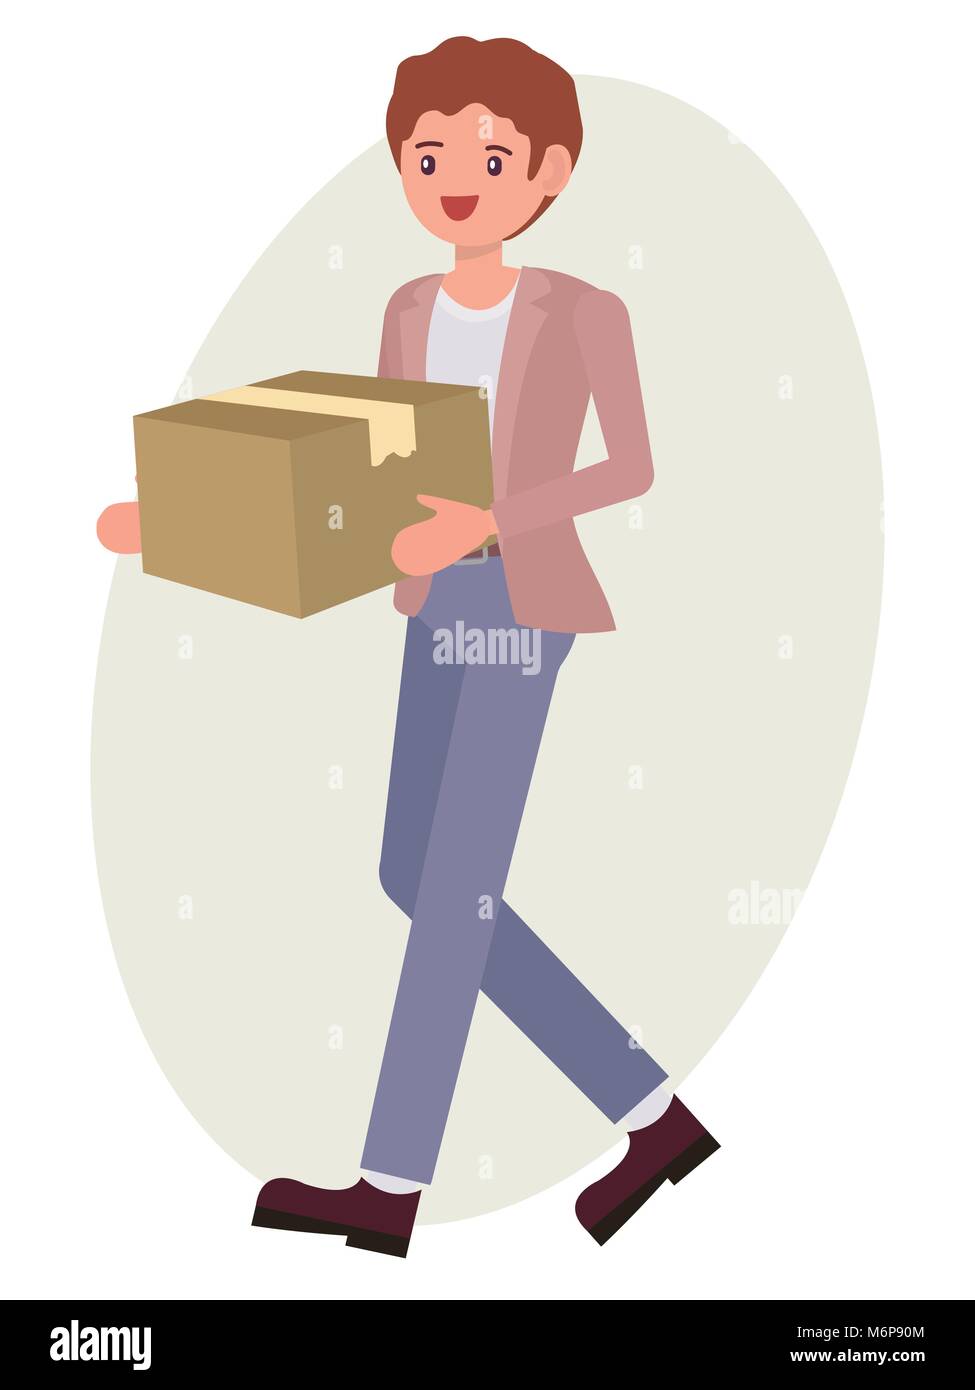 Cartoon character design male man carry paper box Stock Vector